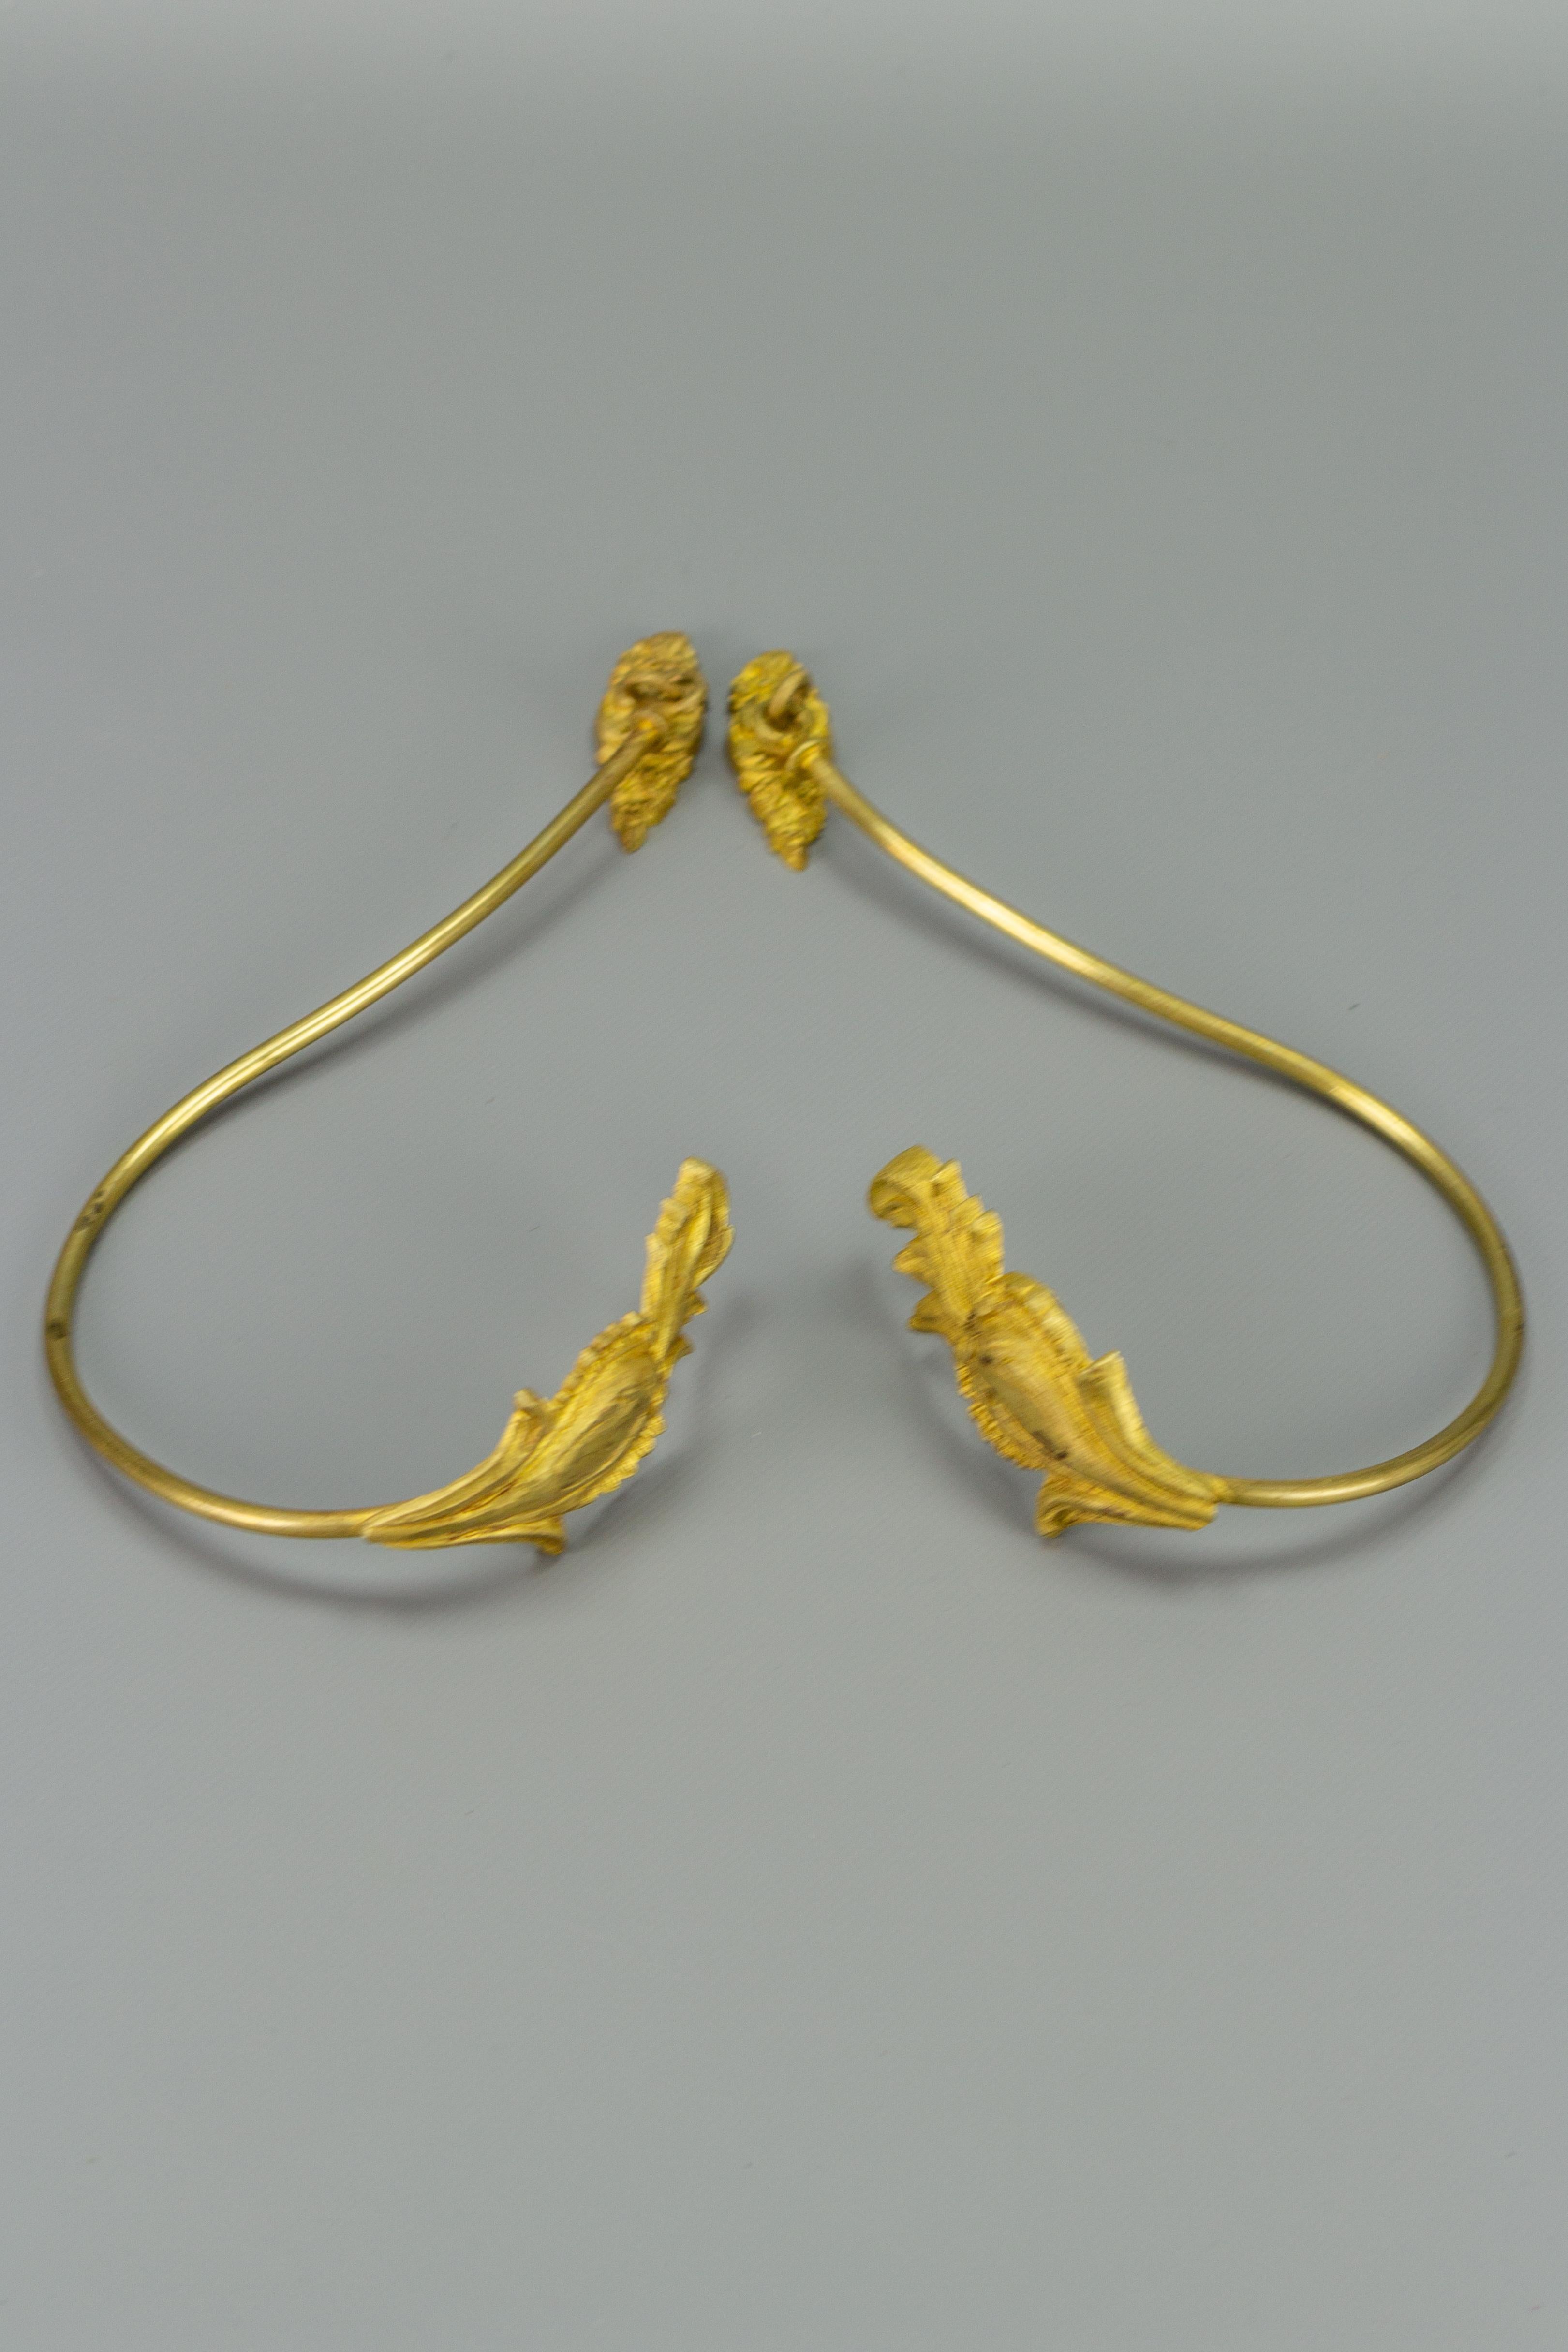 Pair of French Gilt Bronze and Brass Curtain Tiebacks or Curtain Holders 9